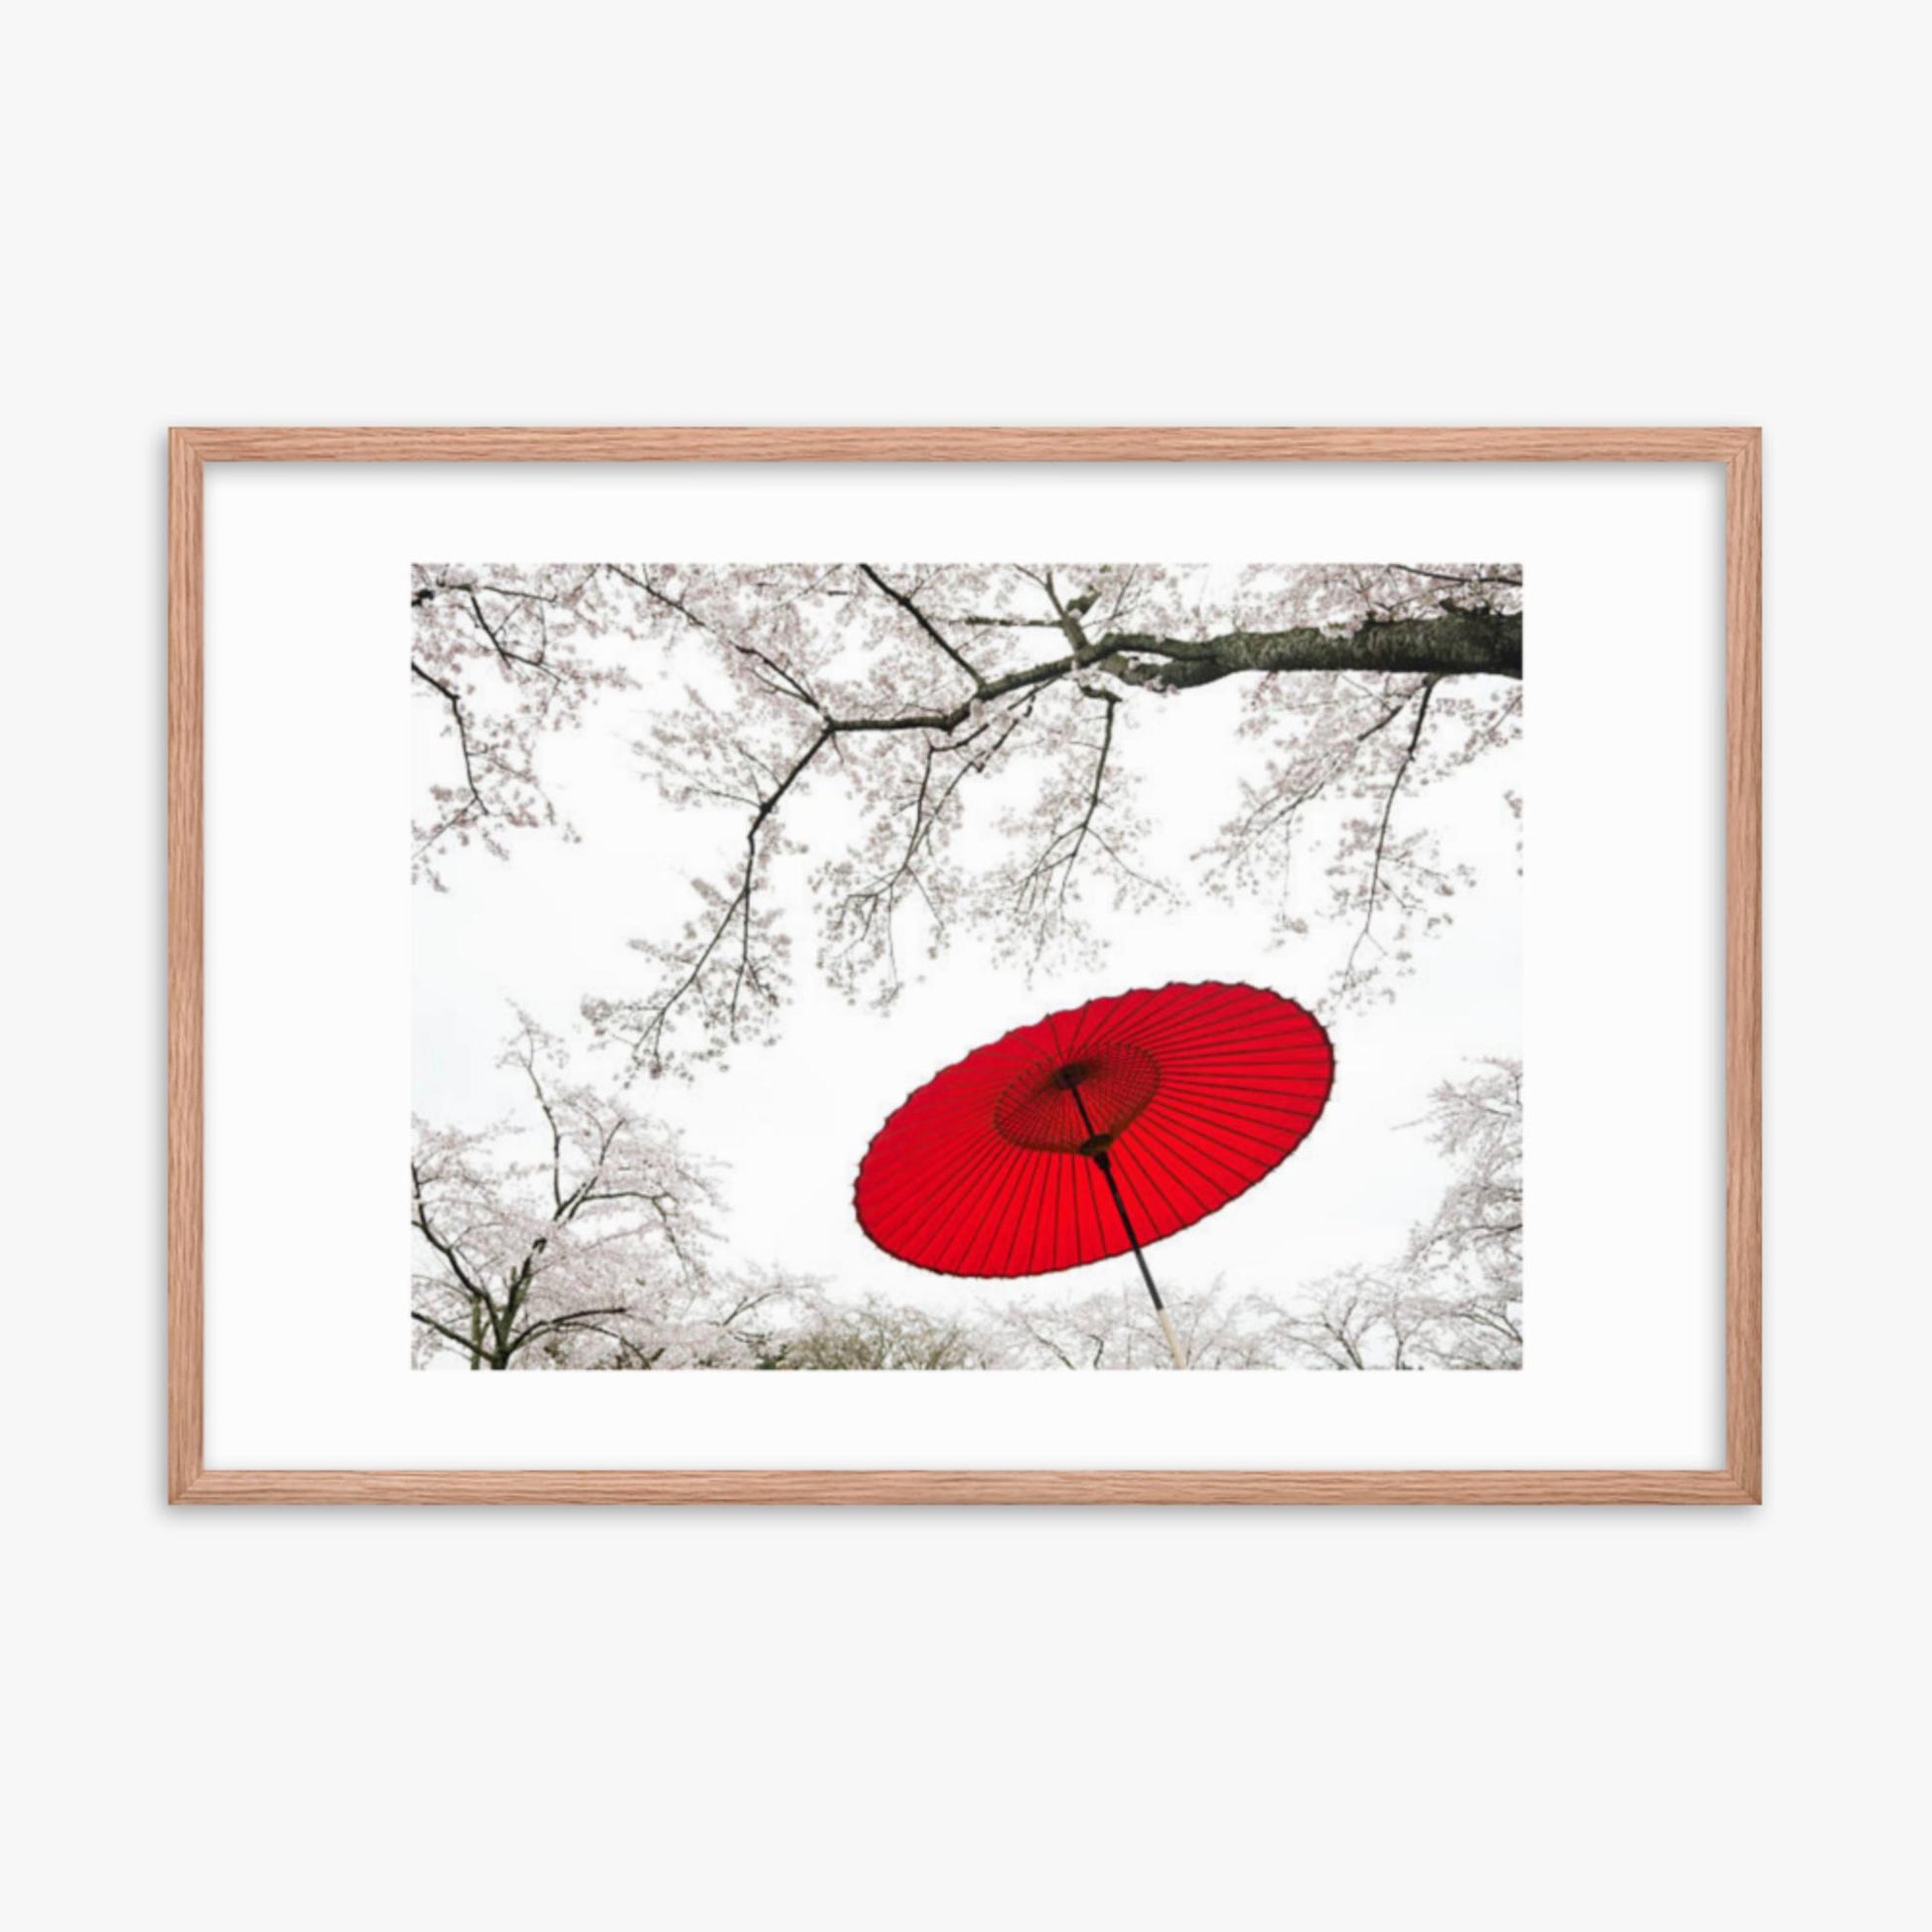 Japanese Umbrella 24x36 in Poster With Oak Frame